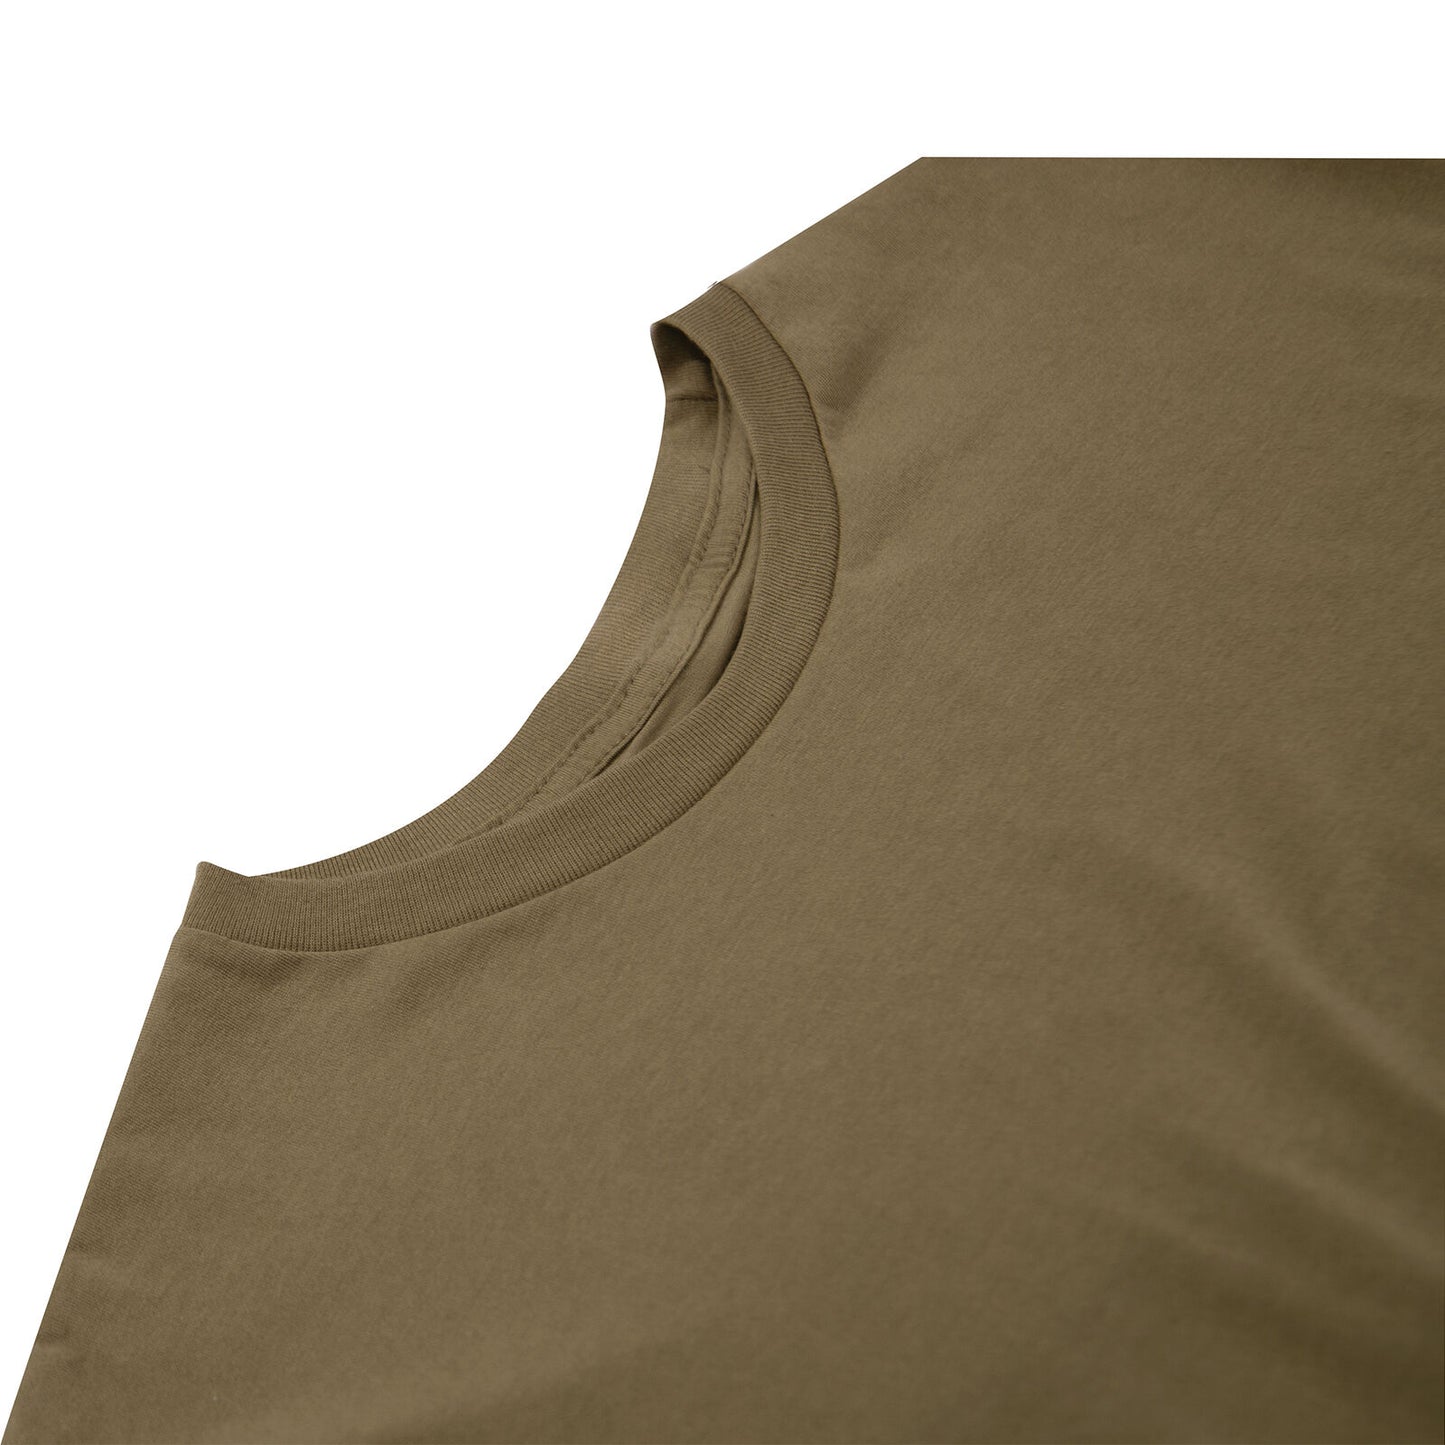 Men's Athletic Fit Solid Color T-Shirt in Brown - Rothco Poly/Cotton Undershirt